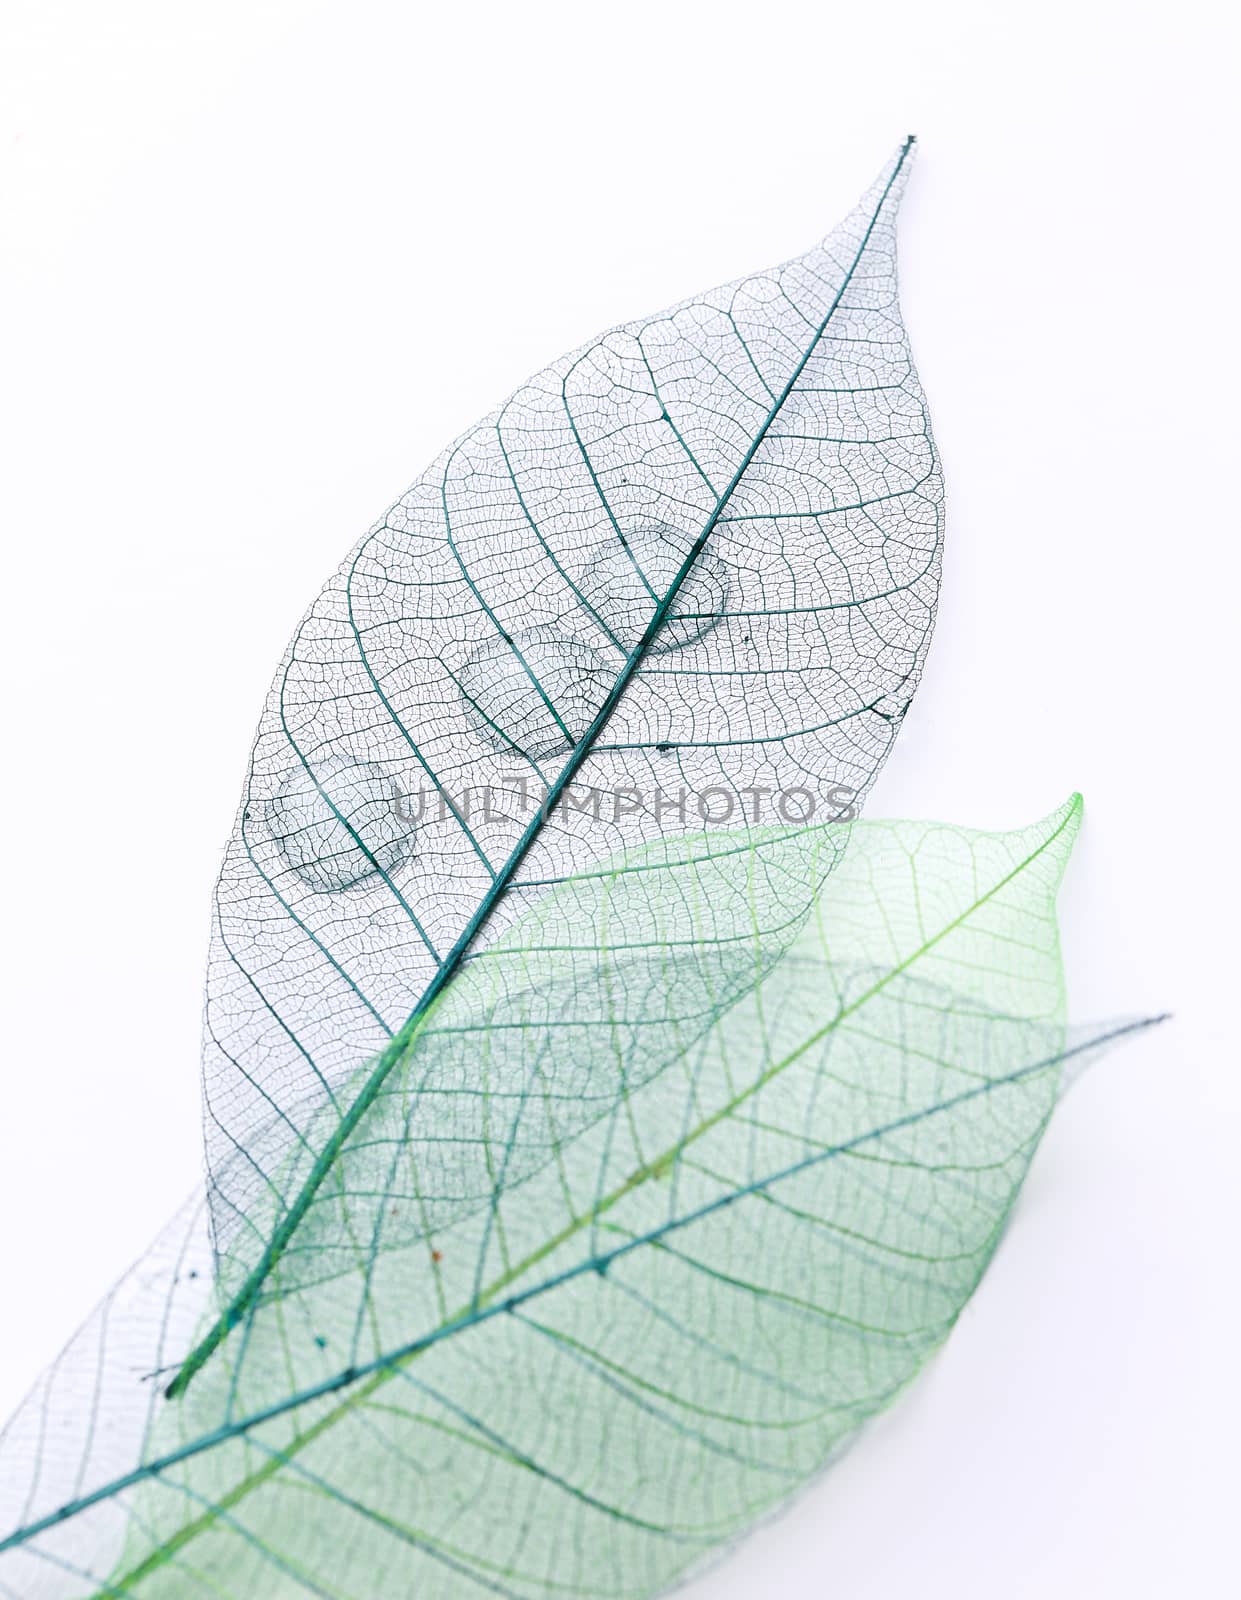 Texture, details. Leaf on the table